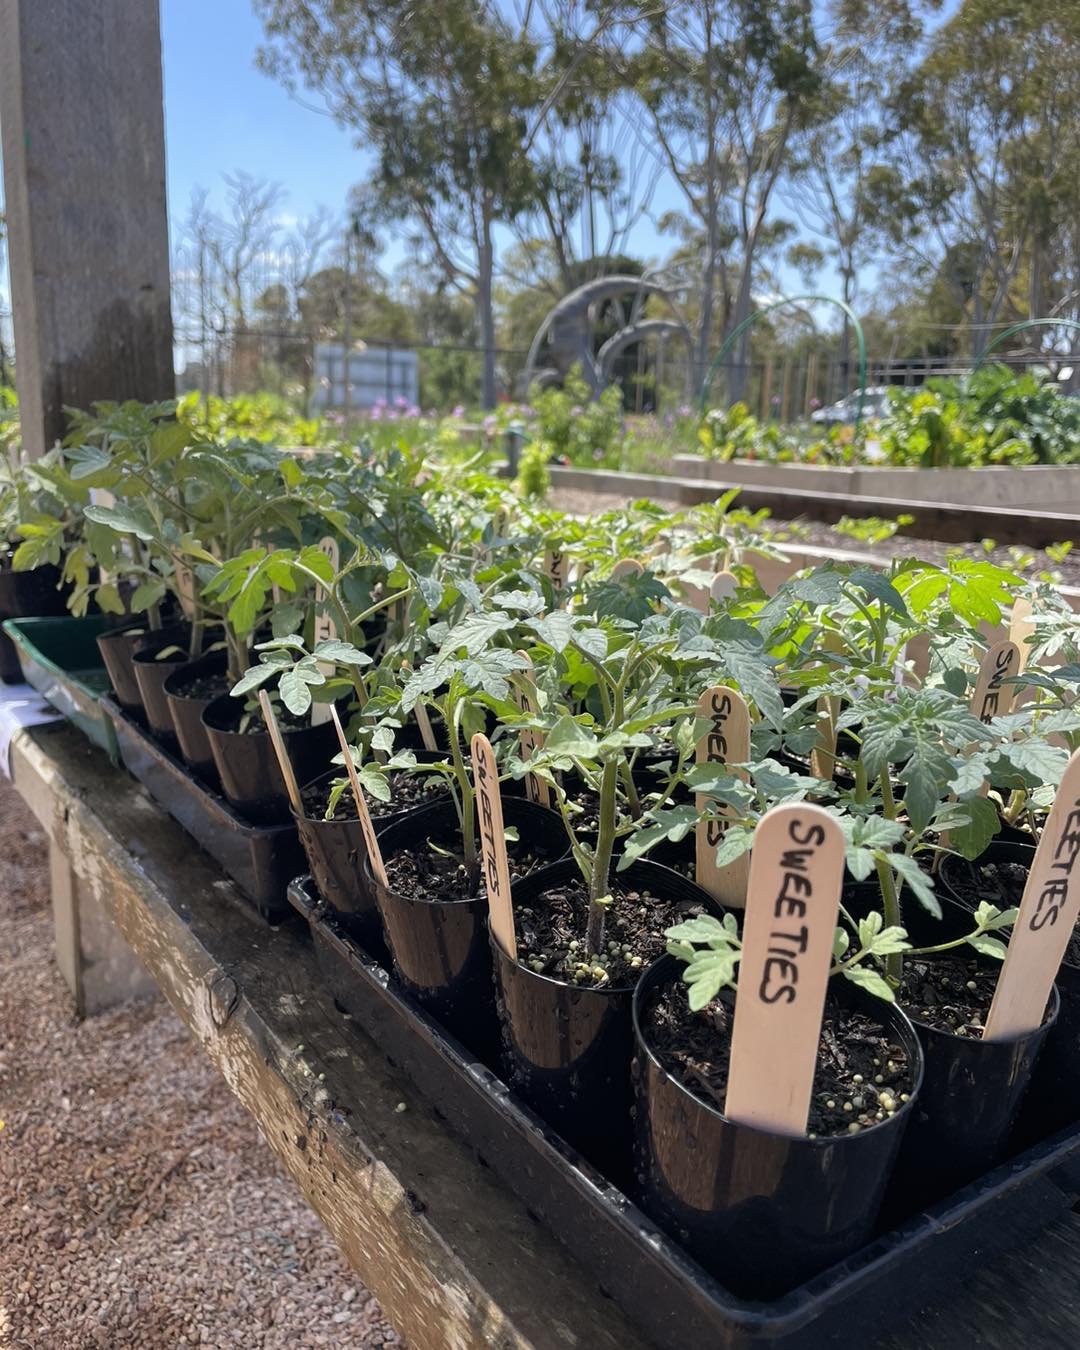 🍅 It&rsquo;s the perfect time to plant your tomatoes and we&rsquo;ve still got some seedlings left at Seed. 🍅

$3 each- payable with cash or by scanning the QR code and paying electronically! 

#wellingtonshire #communitygardensrock #communitygarde